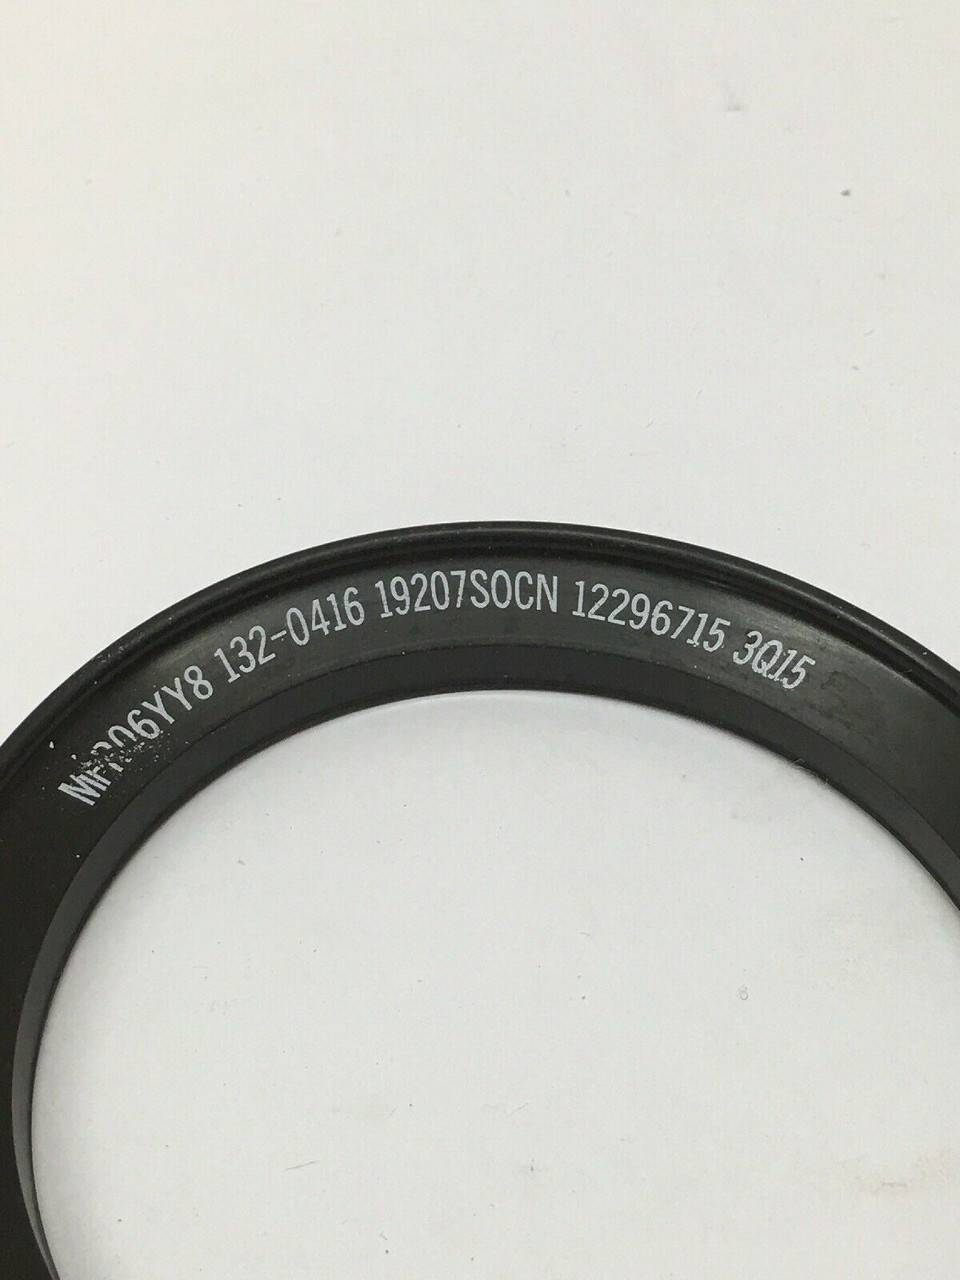 Plain Seal B60-80-7026 12296715	132-5575	Solid Rubber